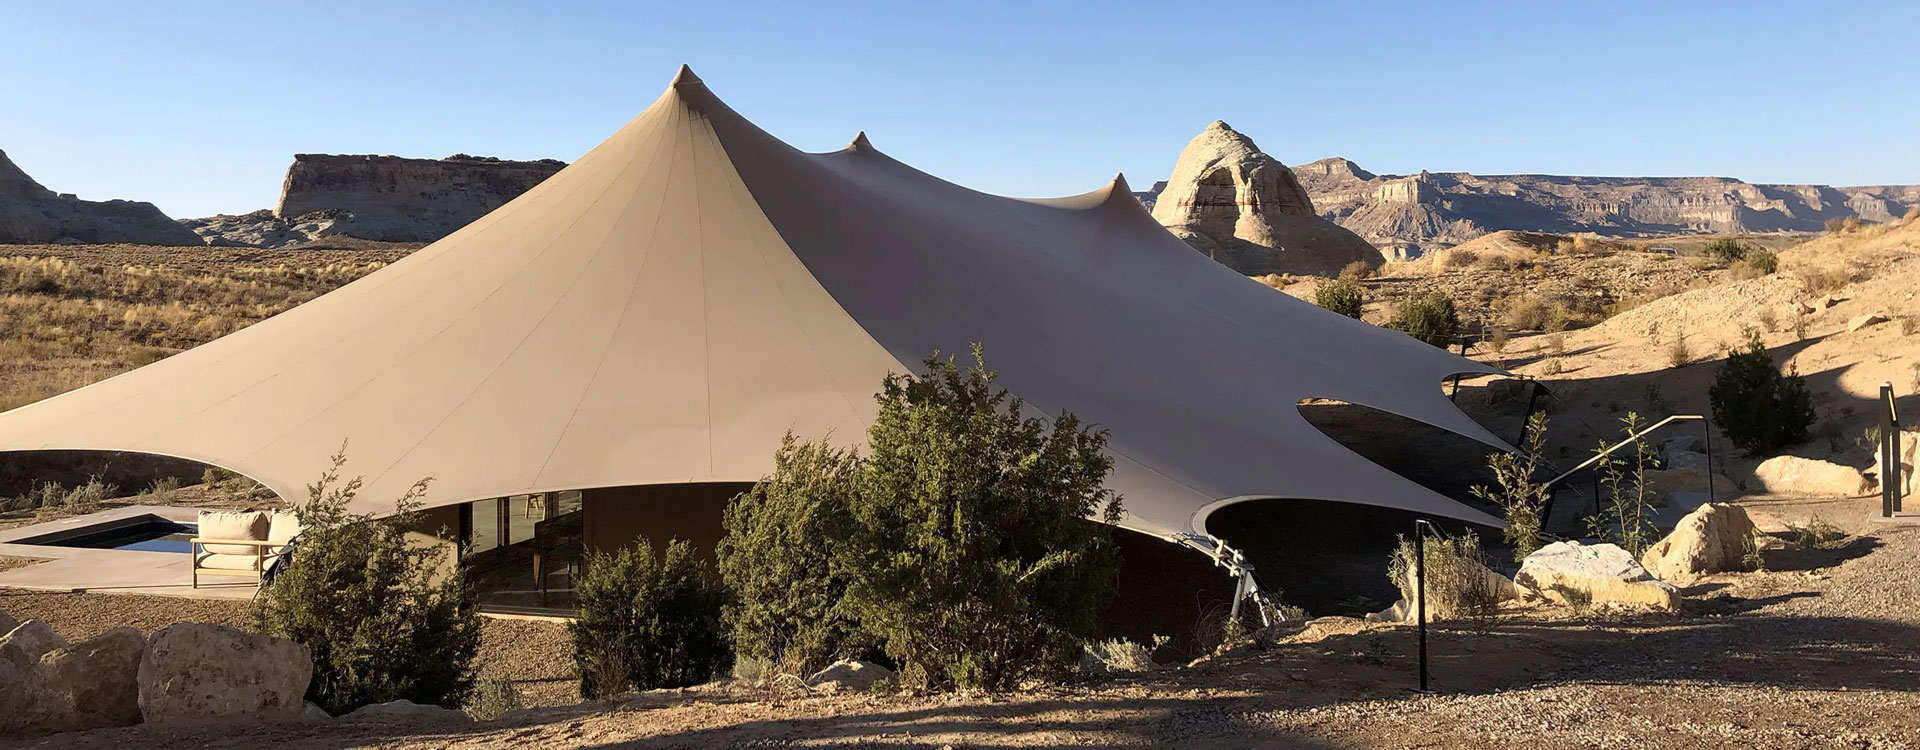 15 Day Namibia Camping Expedition